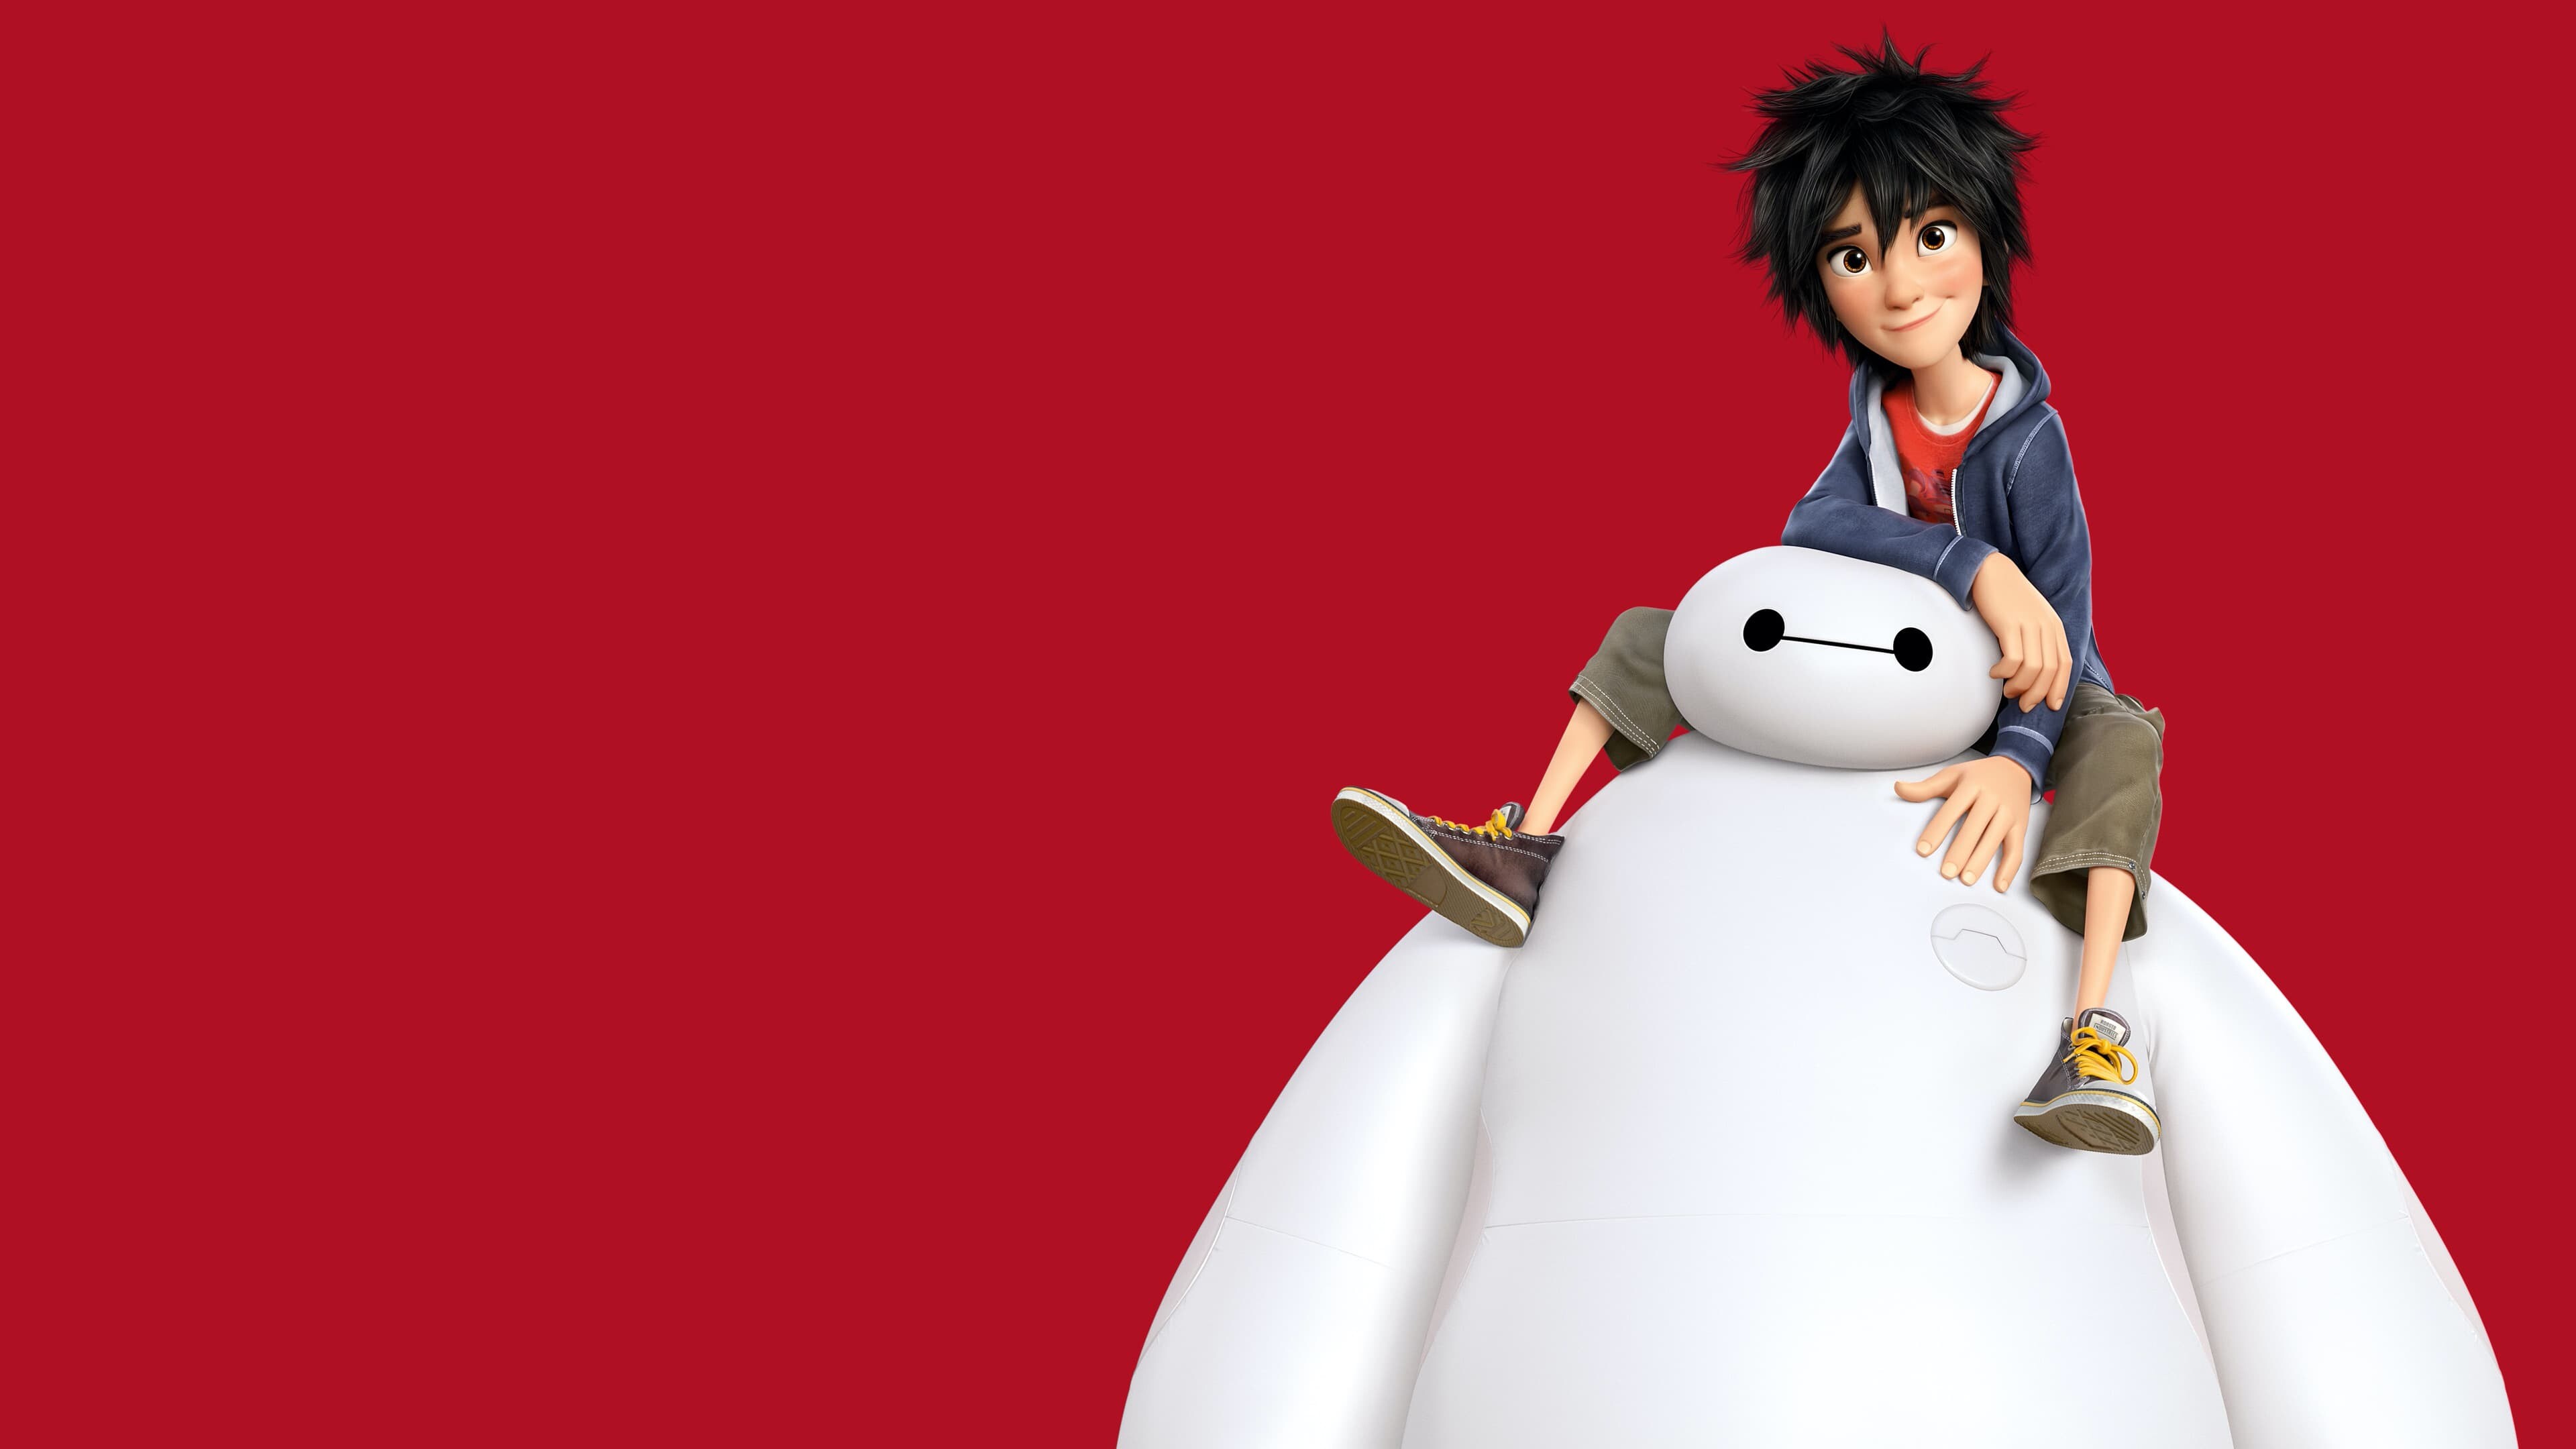 Baymax! (TV Series): Hiro Hamada, Cute robot which contains 10,000 different medical procedures. 3840x2160 4K Wallpaper.